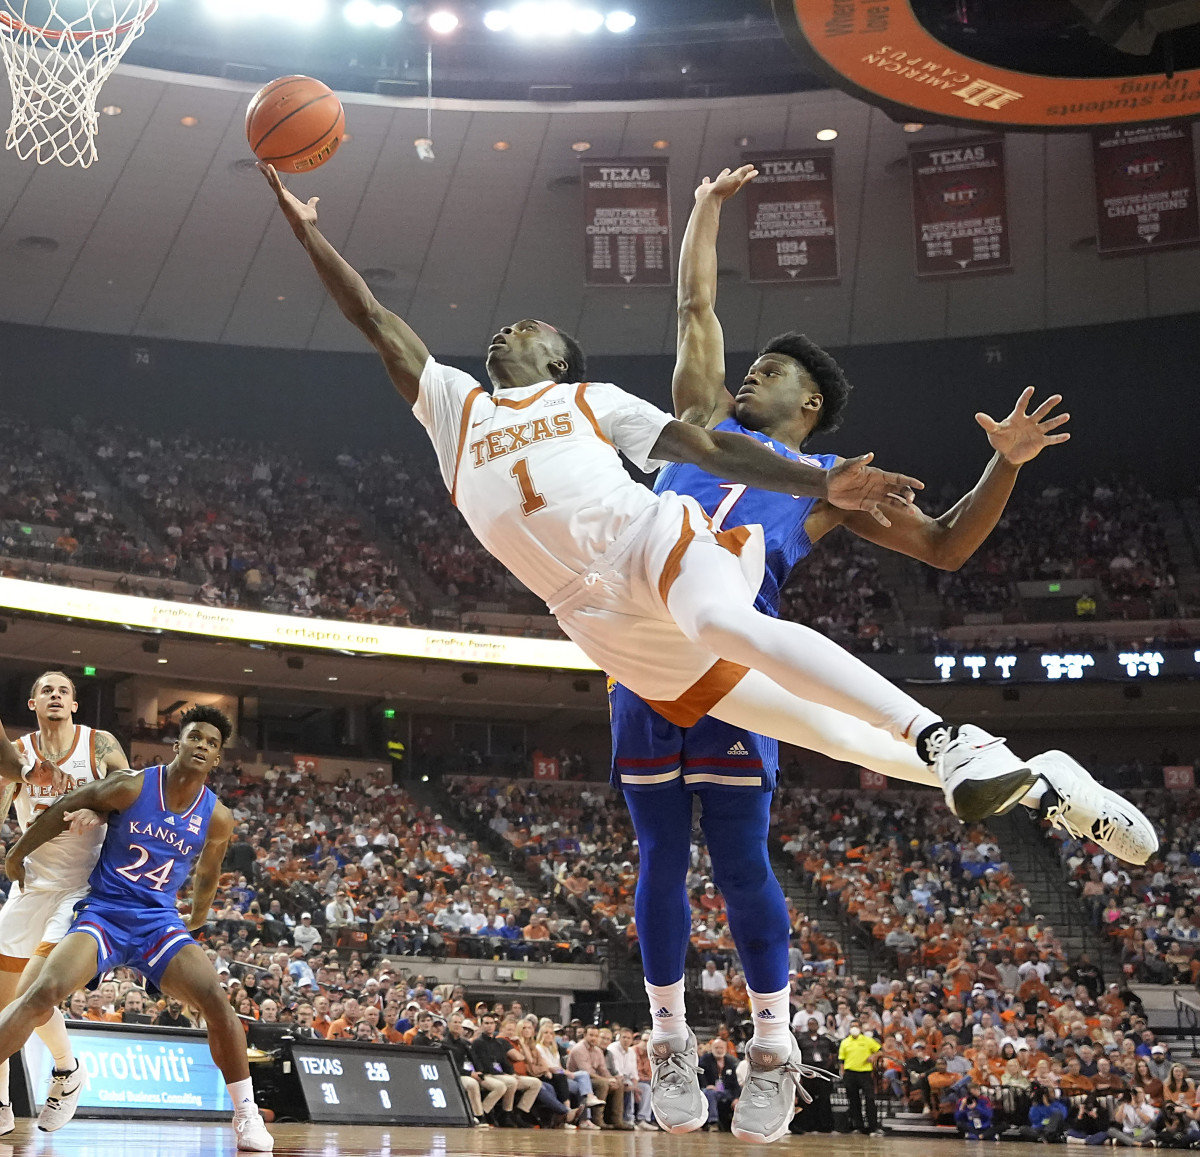 Texas Longhorns guard Andrew Jones (1) drives to the basket while defended by Kansas Jayhawks guard Joseph Yesufu (1) during the first half at Frank C. Erwin Jr. Center.